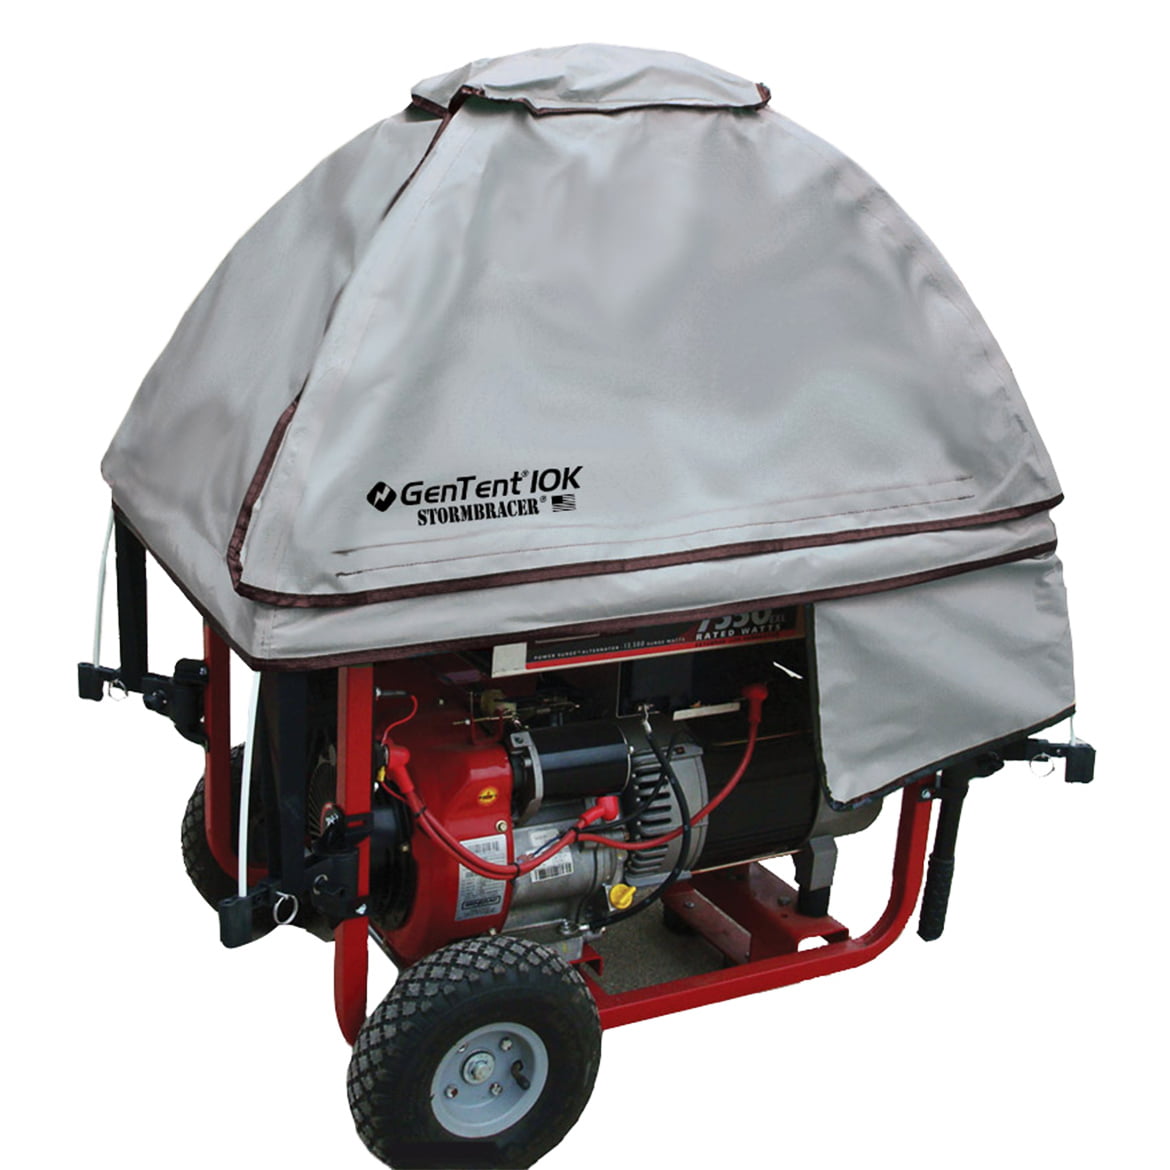 Universal Fit in GreySkies GenTent Safety Canopies 10k Running Safety Cover for Portable Generators